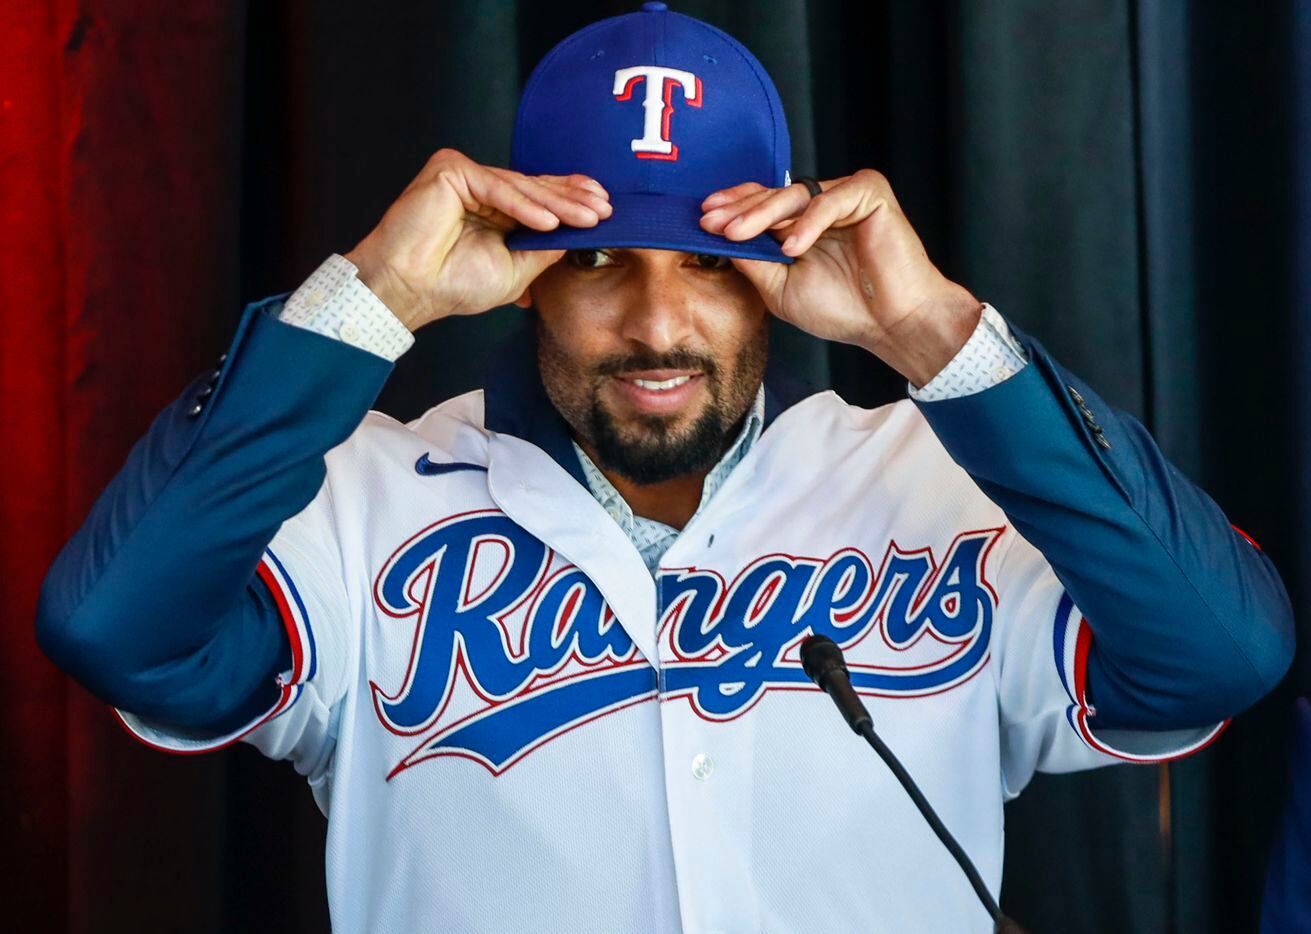 Marcus Semien adjusts his Texas Rangers baseball hat at a news conference at Globe Life Park in Arlington on Wednesday, Dec. 1, 2021. Former Toronto Blue Jays, Marcus Semien, signed a contract with the Texas Rangers for 175 million dollars. (Rebecca Slezak/The Dallas Morning News)